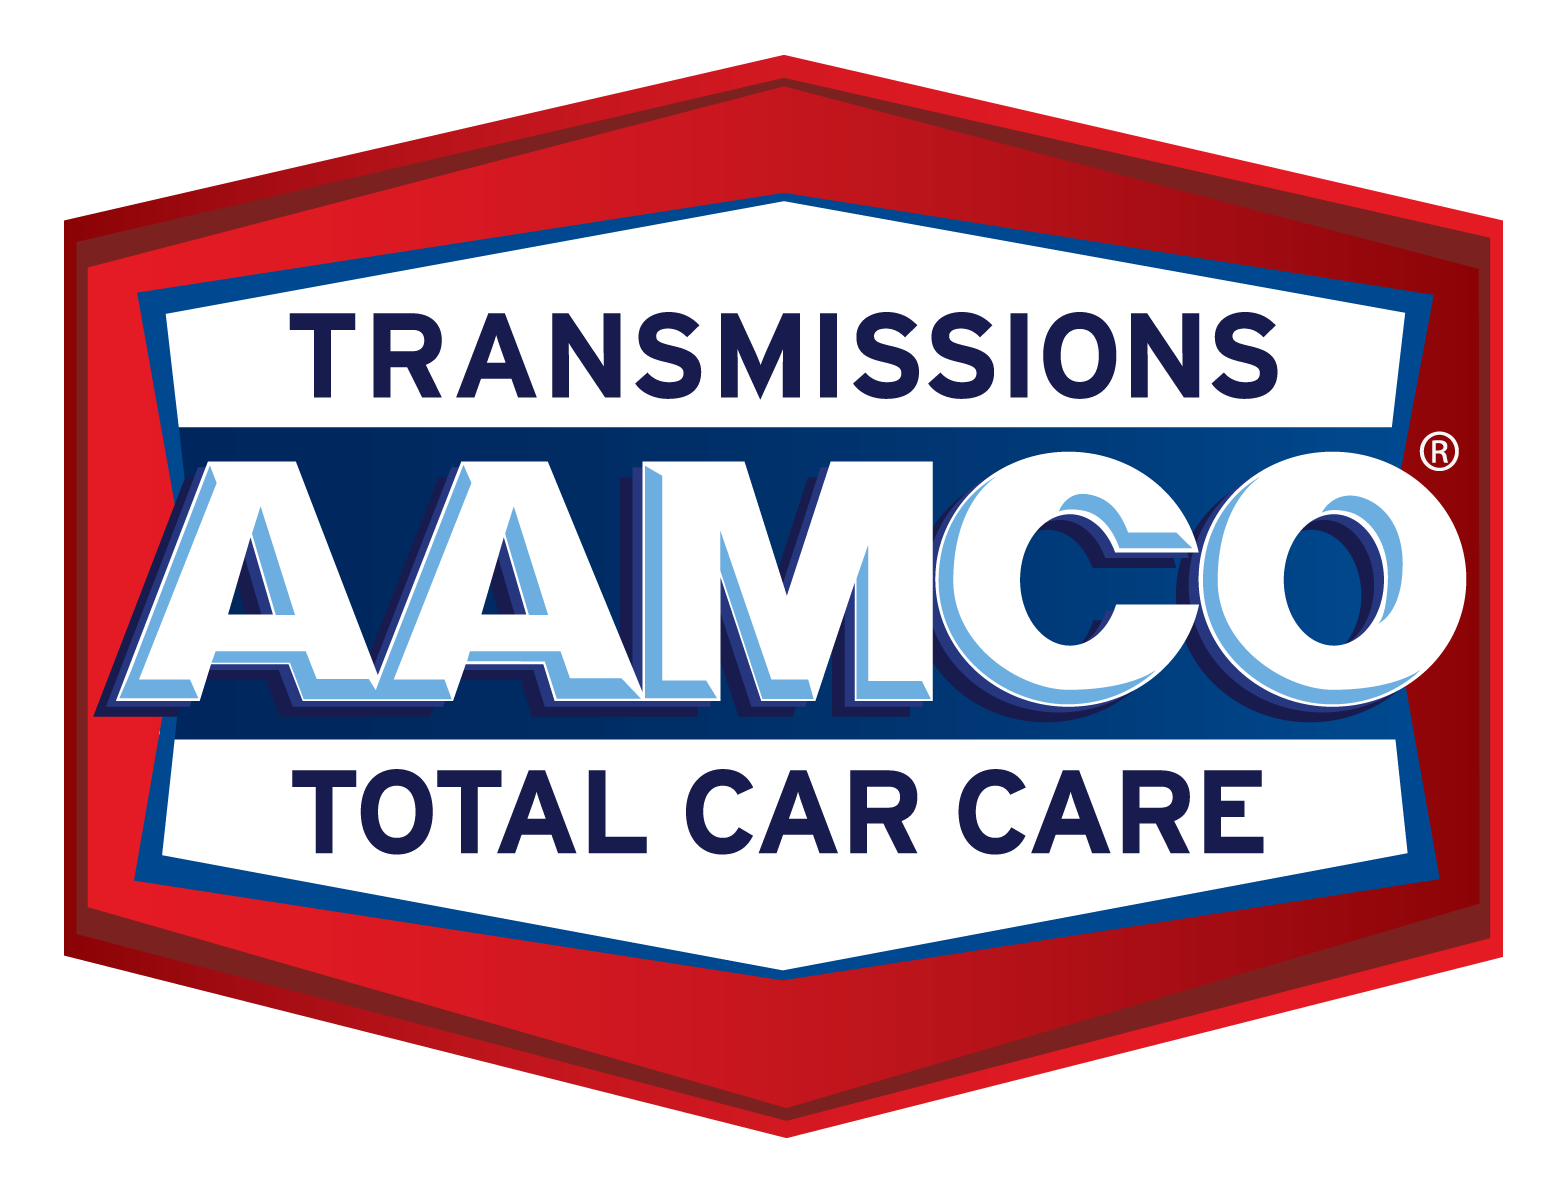 AAMCO